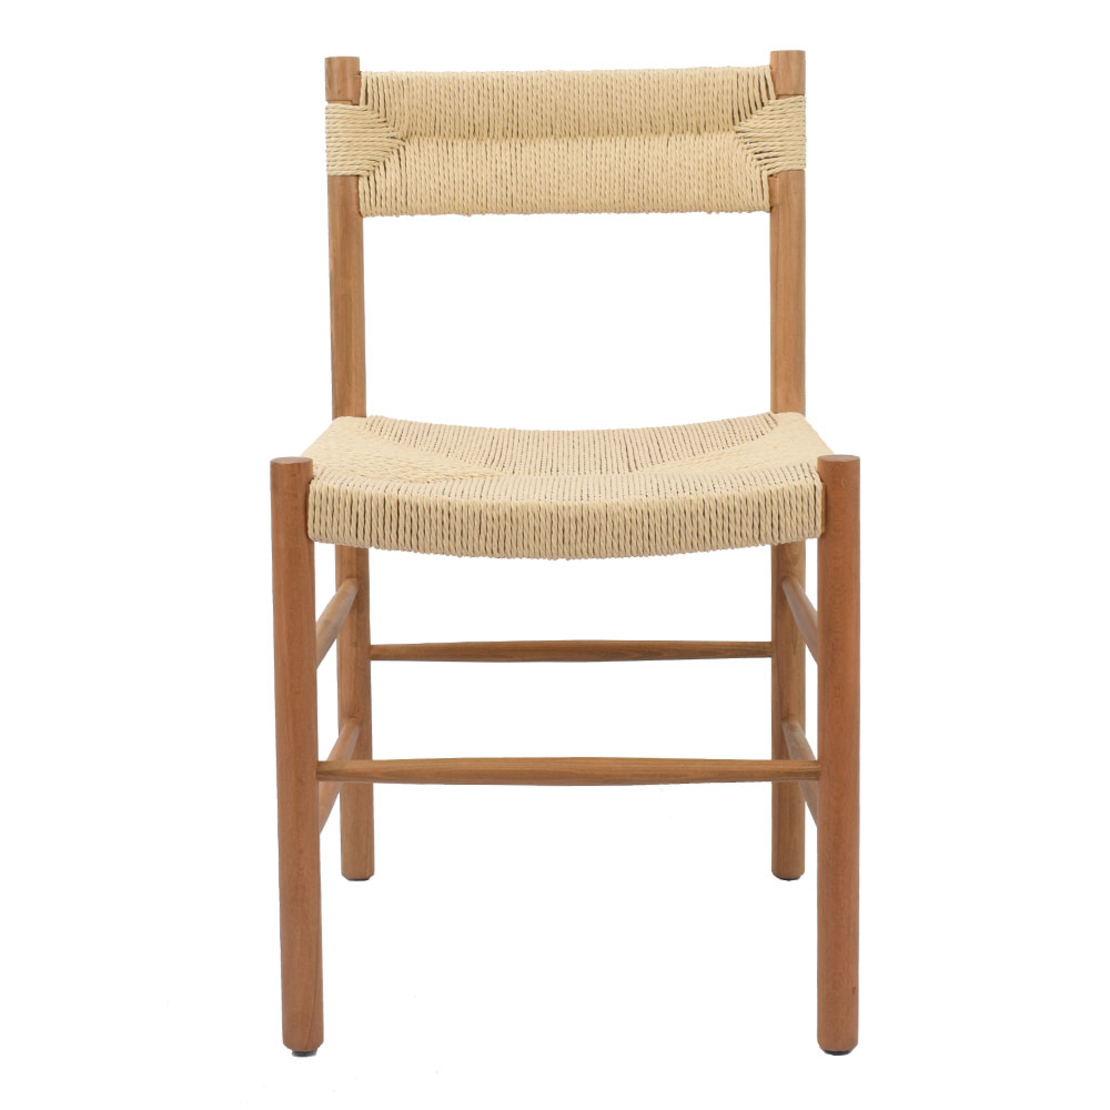 CABO CHAIR SOLID WOOD RUBBERWOOD NATURAL ROPE PRC